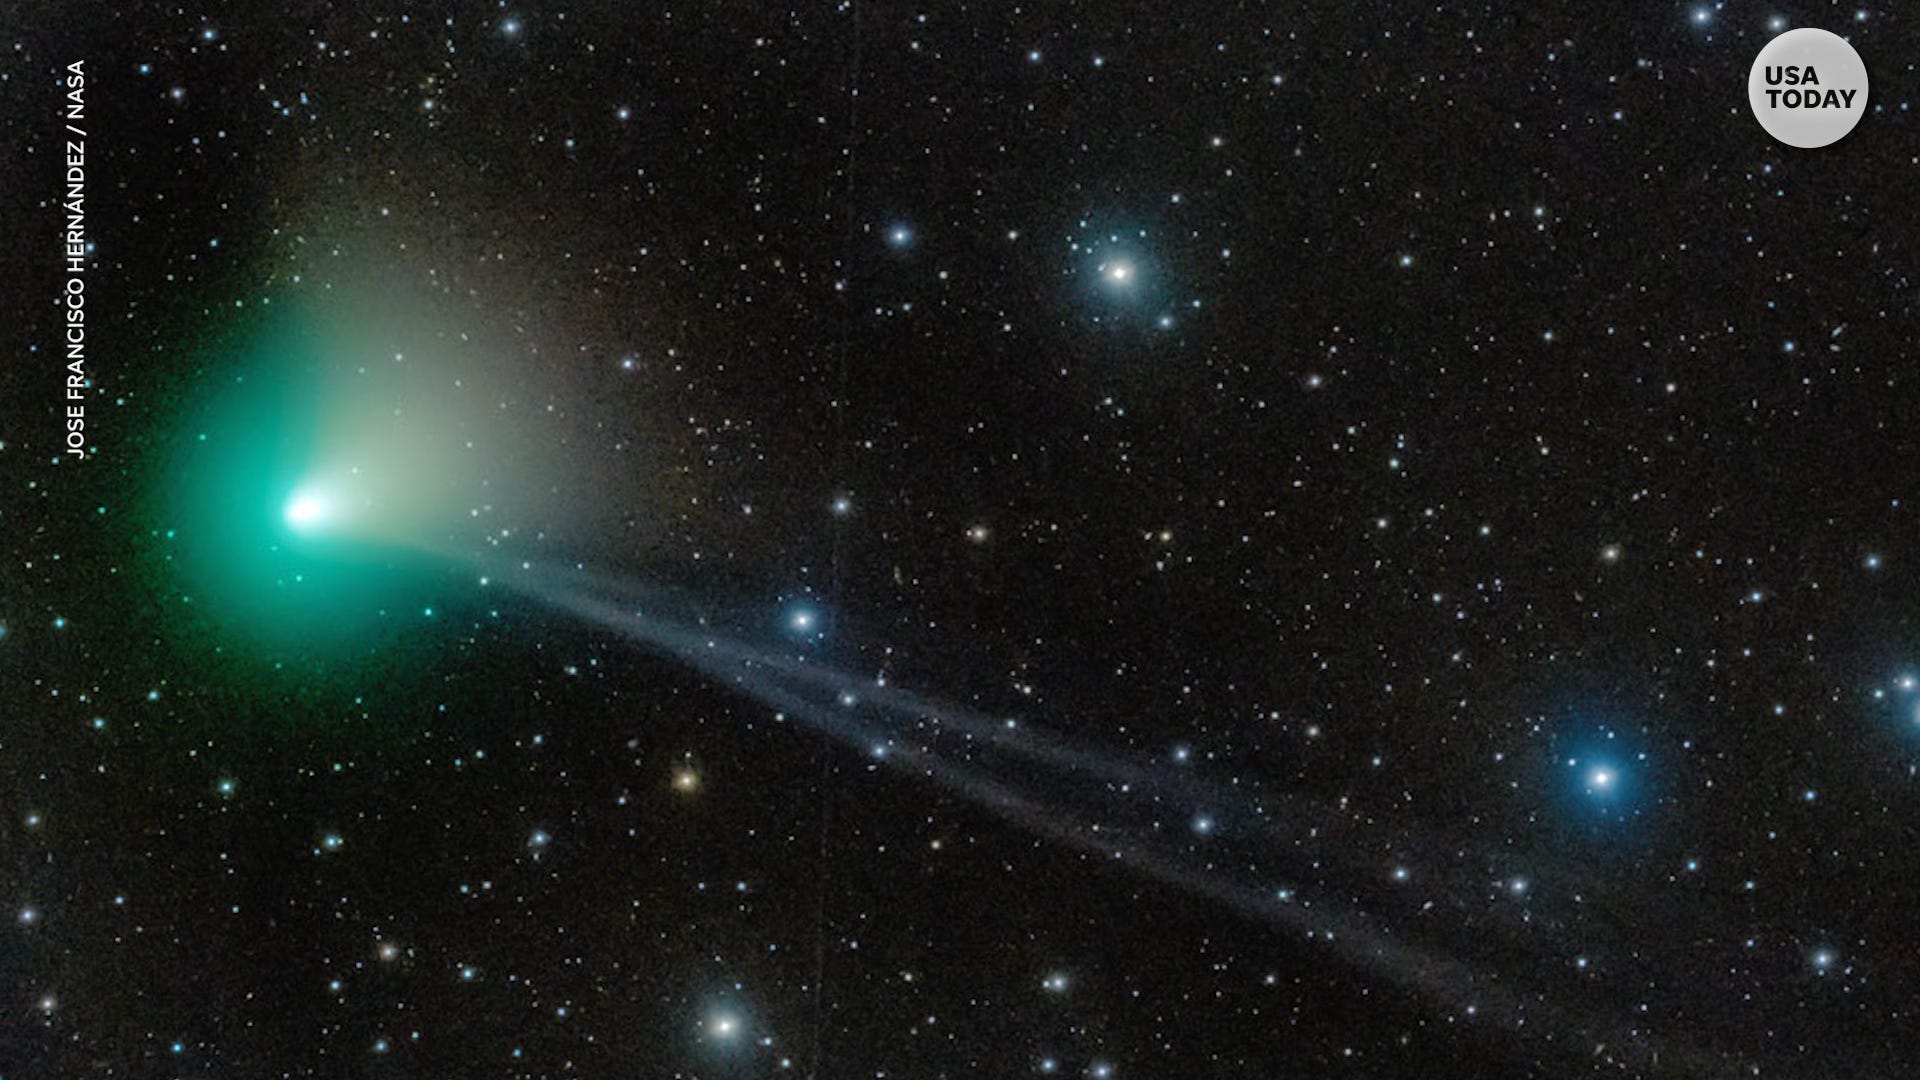 This newlydiscovered green comet is nearing Earth and it may be vi...